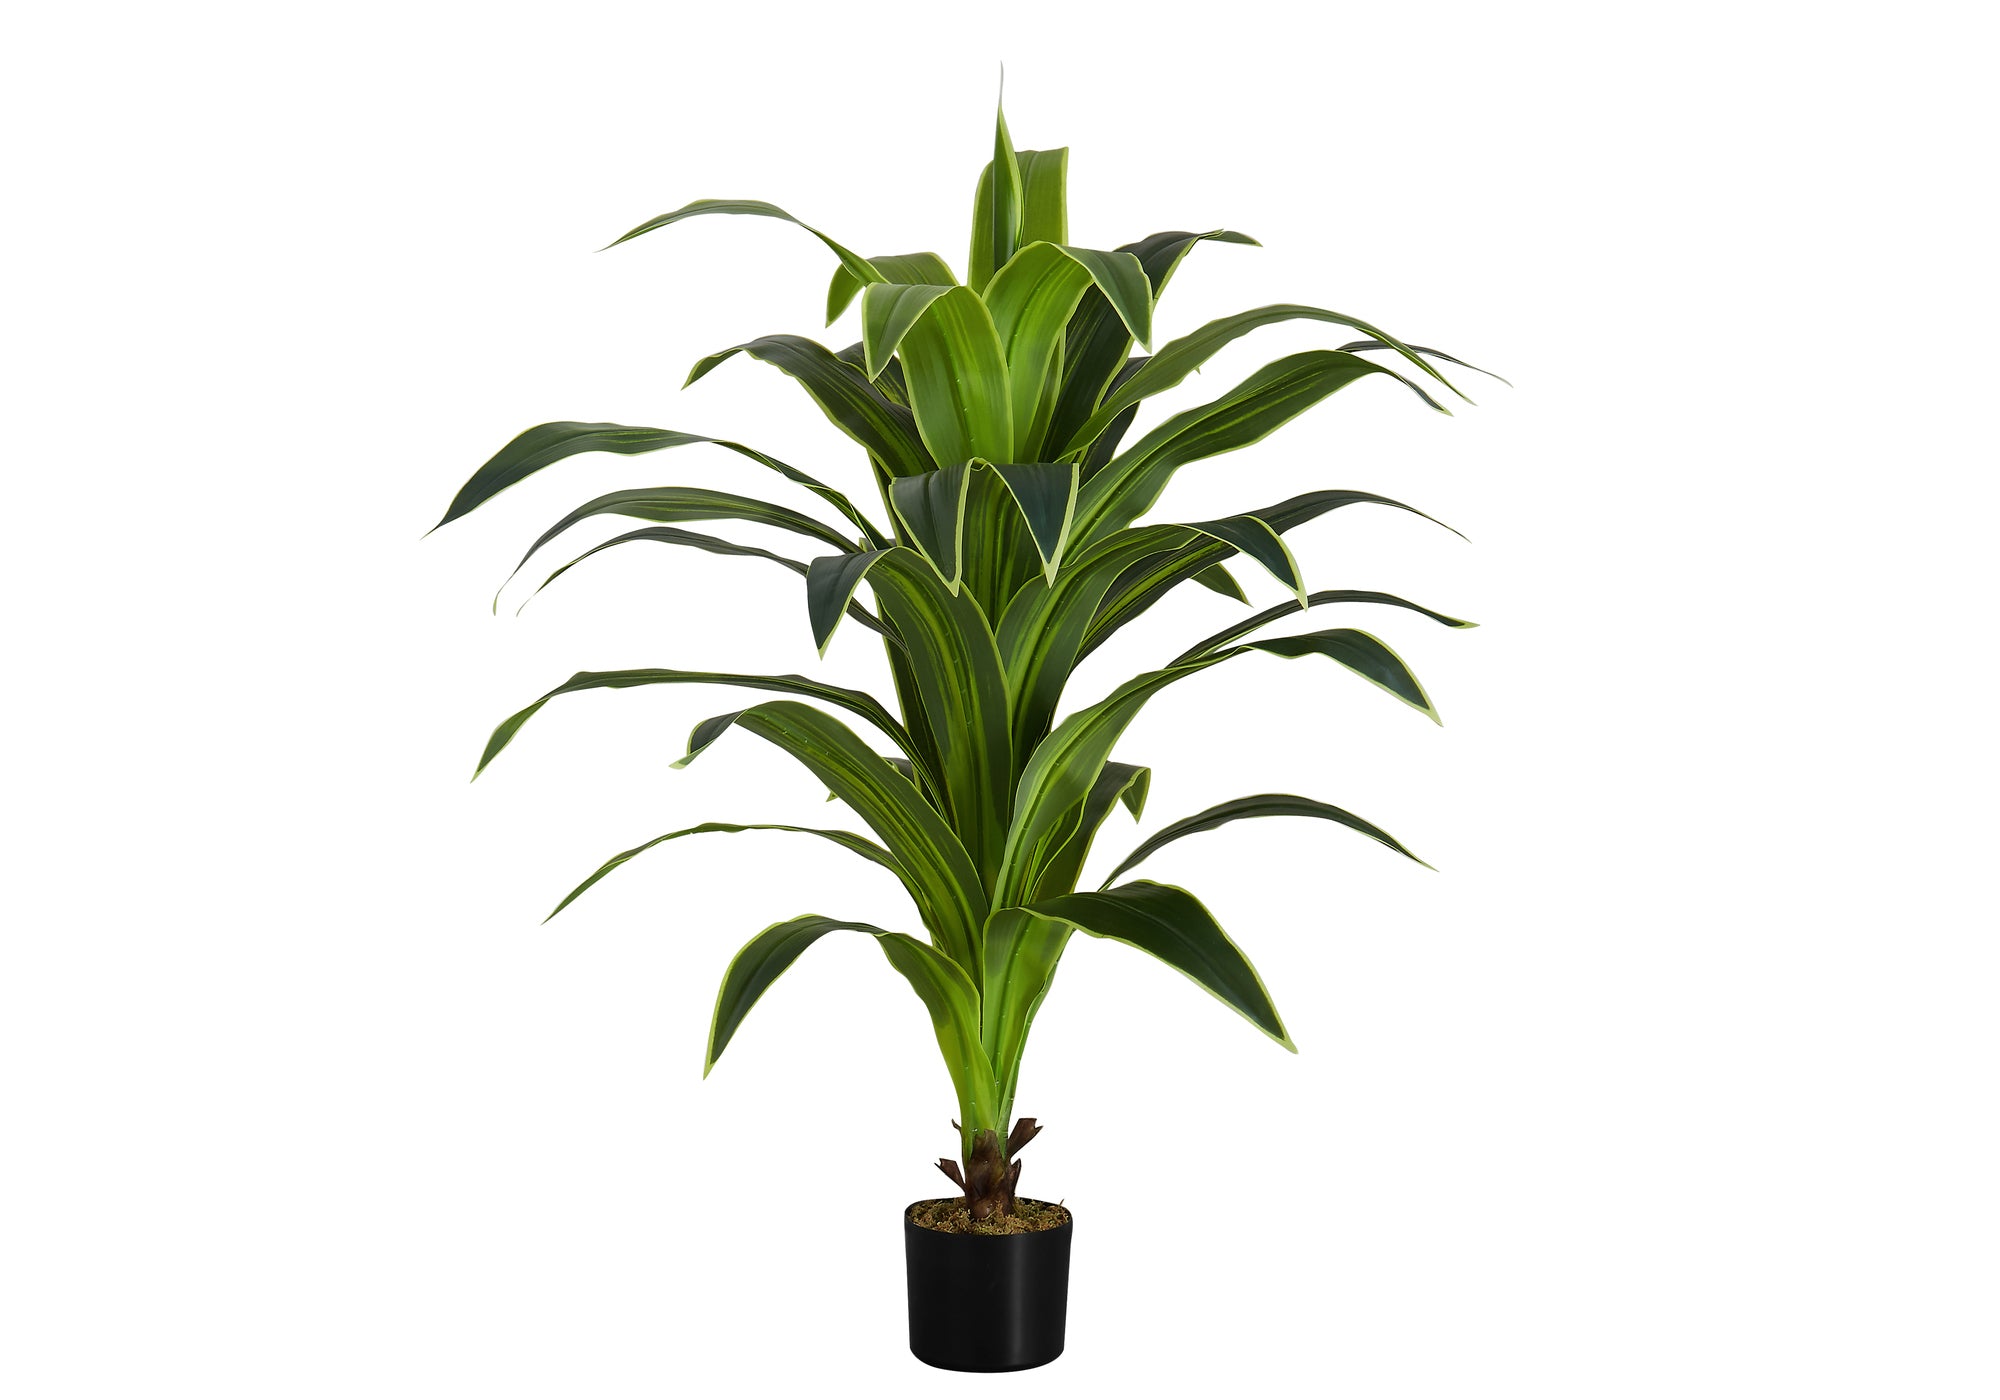 MN-489542    Artificial Plant, 47" Tall, Dracaena Tree, Indoor, Faux, Fake, Floor, Greenery, Potted, Real Touch, Decorative, Green Leaves, Black Pot